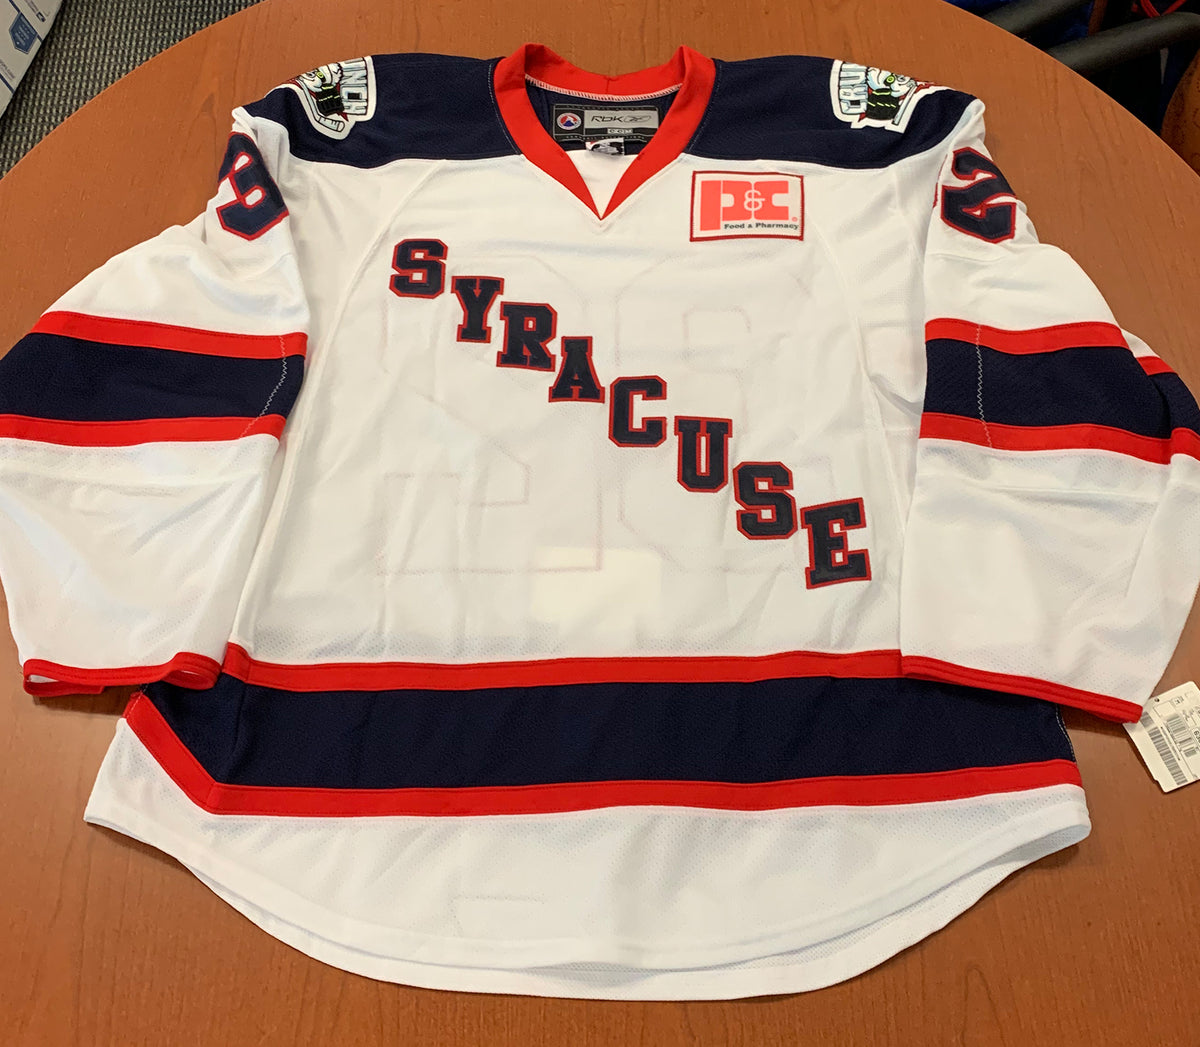 32 Kevin Schmidt SYRACUSE White Jersey - 2008-09 – Syracuse Crunch Official  Team Store